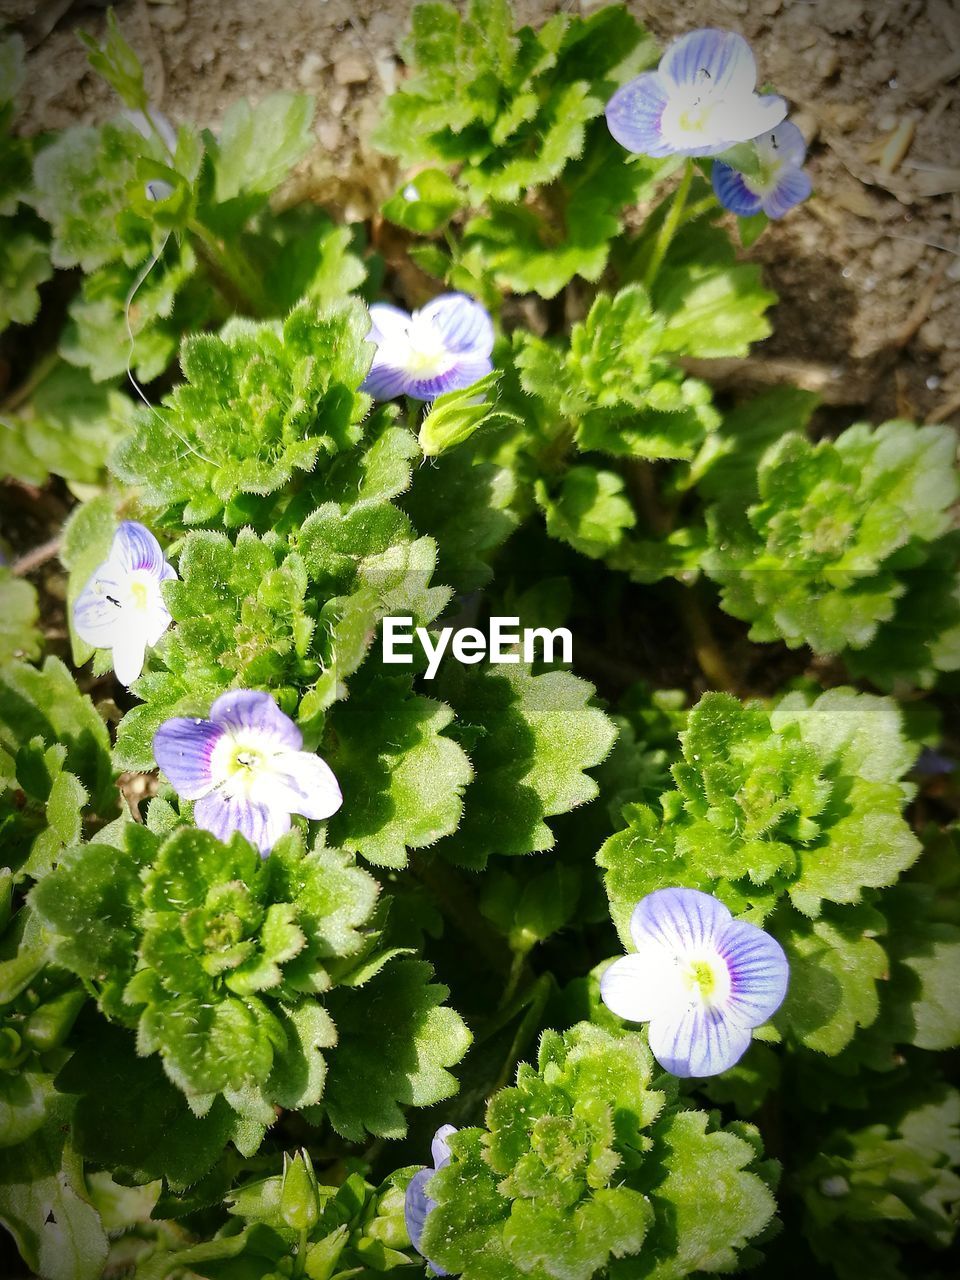 CLOSE-UP OF PURPLE FLOWERS BLOOMING IN PLANT